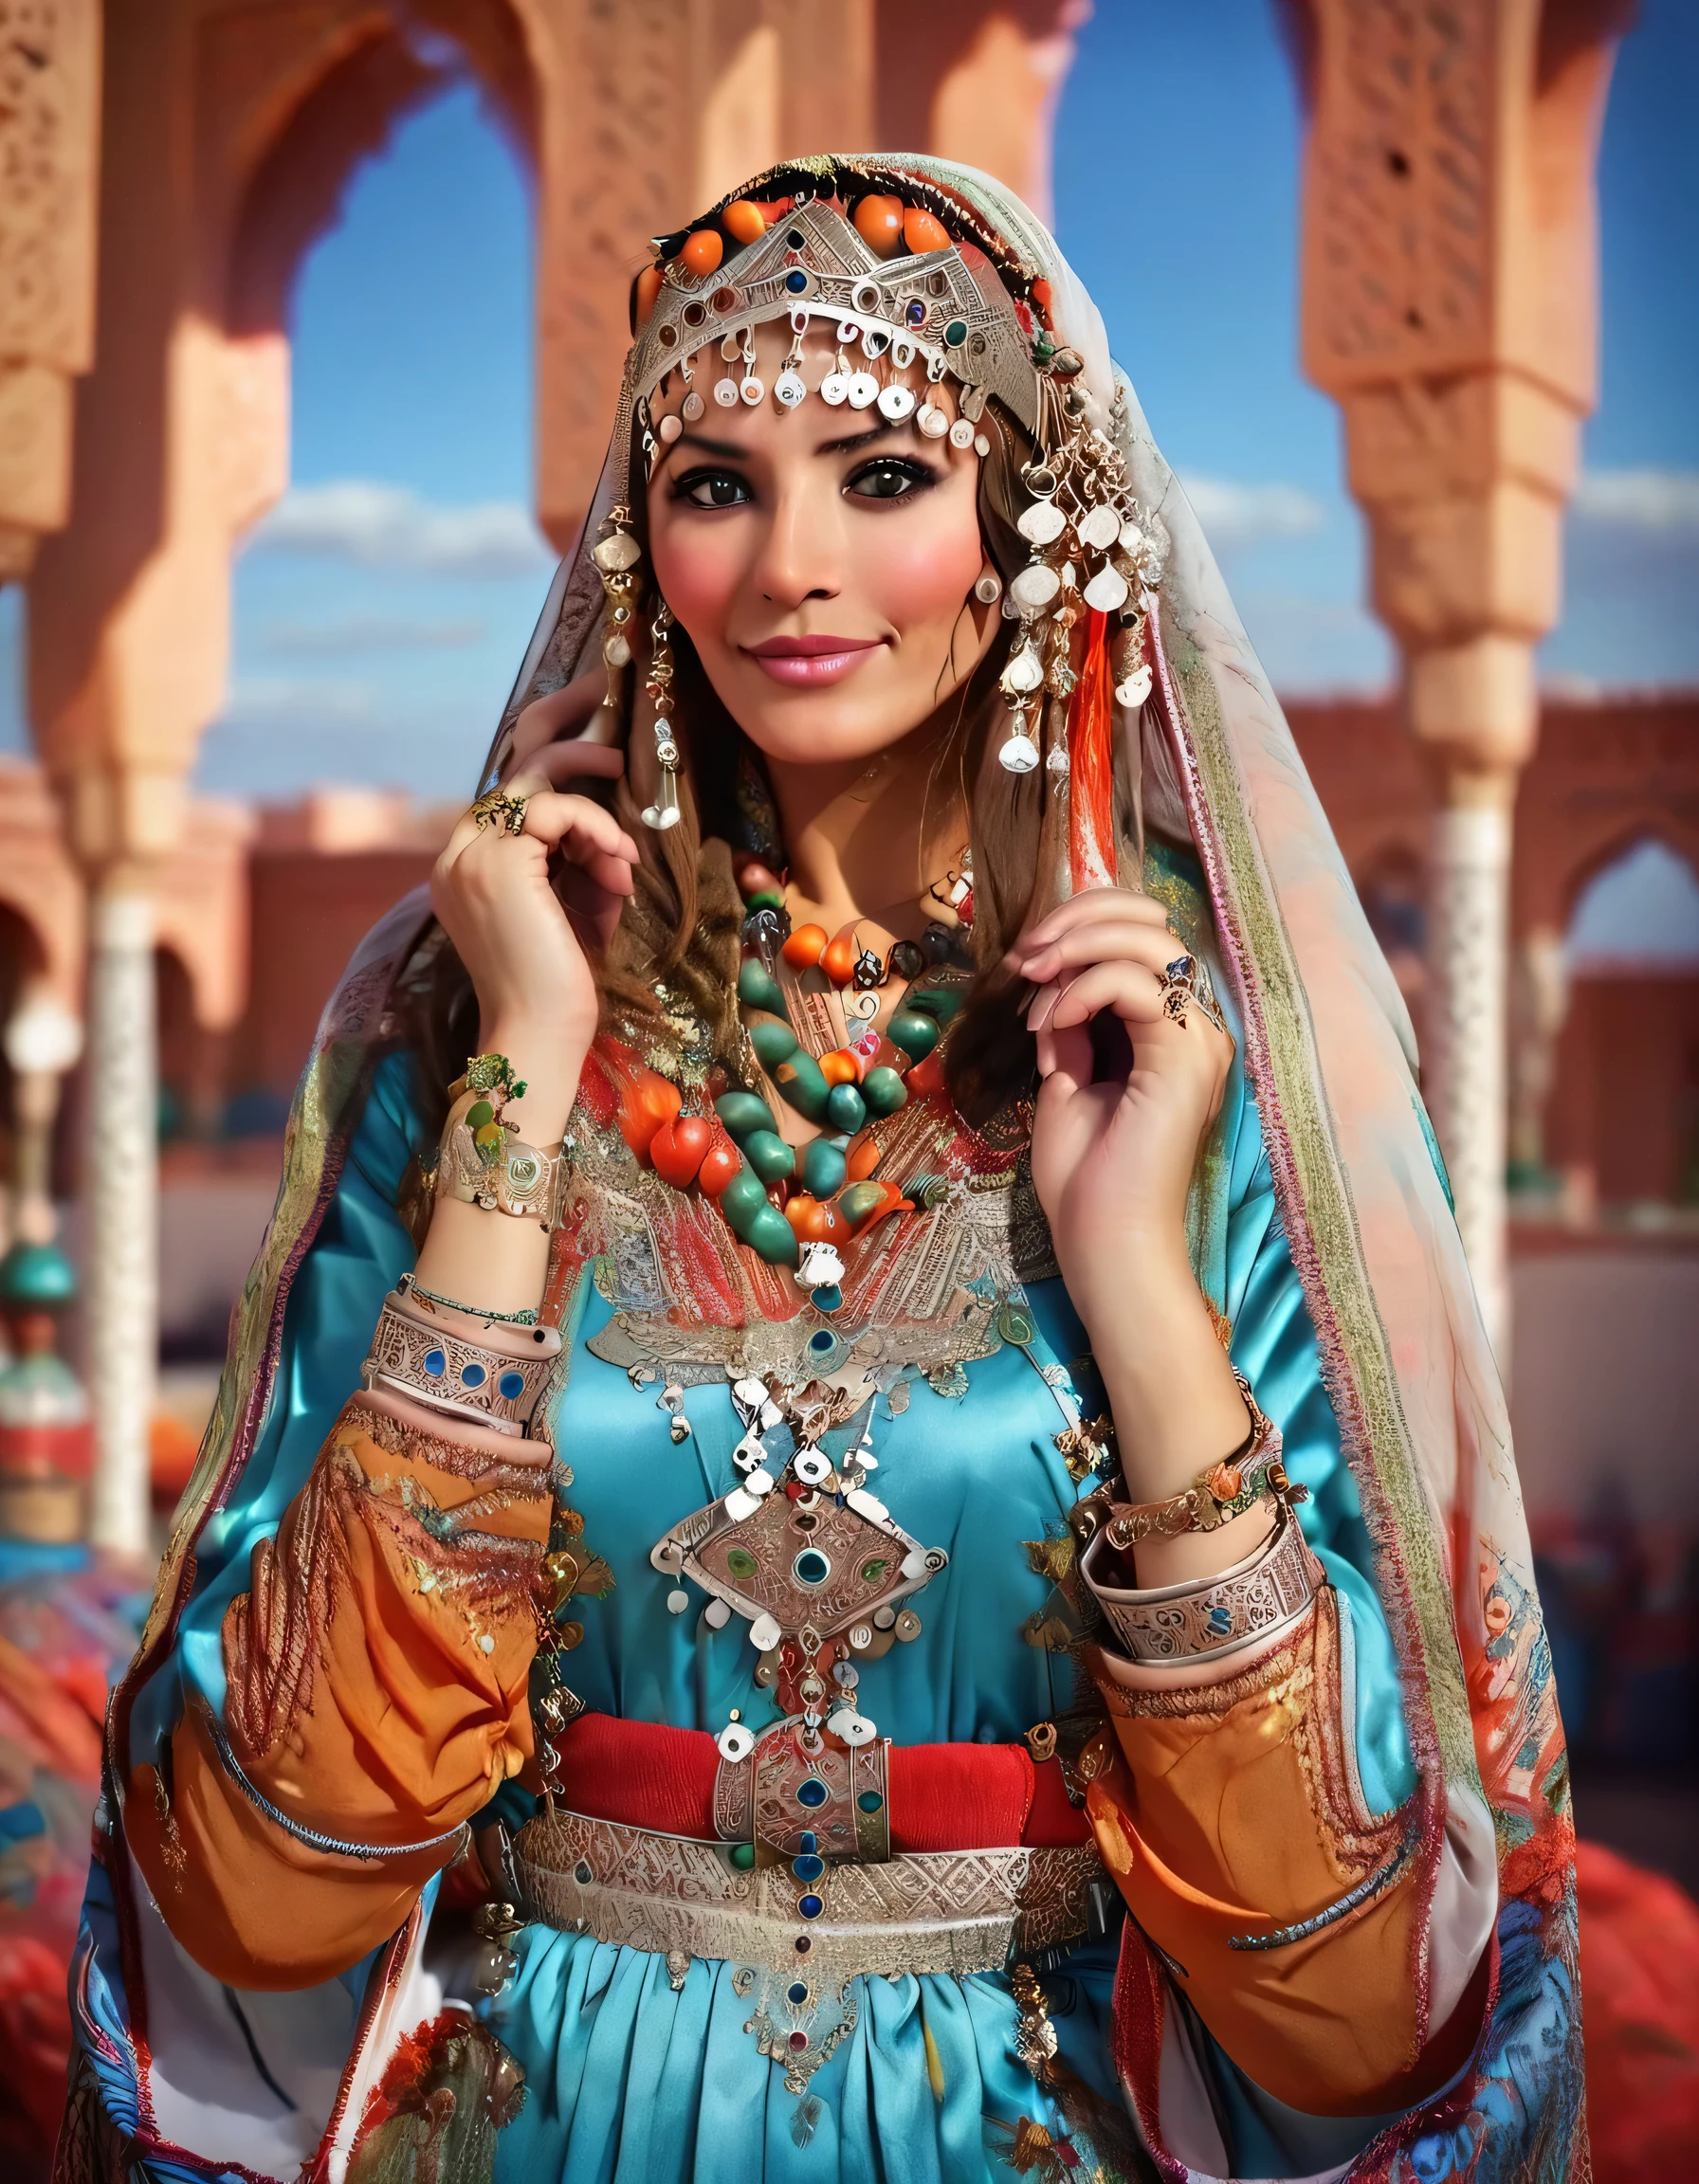 long shot scenic professional photograph of pretty woman, brunette, light eyes, jewelry, Moroccan Caftan, TazerzitXL, isni, headdress, Moroccan pattern background., Marrakech, perfect viewpoint, highly detailed, wide-angle lens, hyper realistic, with dramatic sky, polarizing filter, natural lighting, vivid colors, everything in sharp focus, HDR, UHD, K